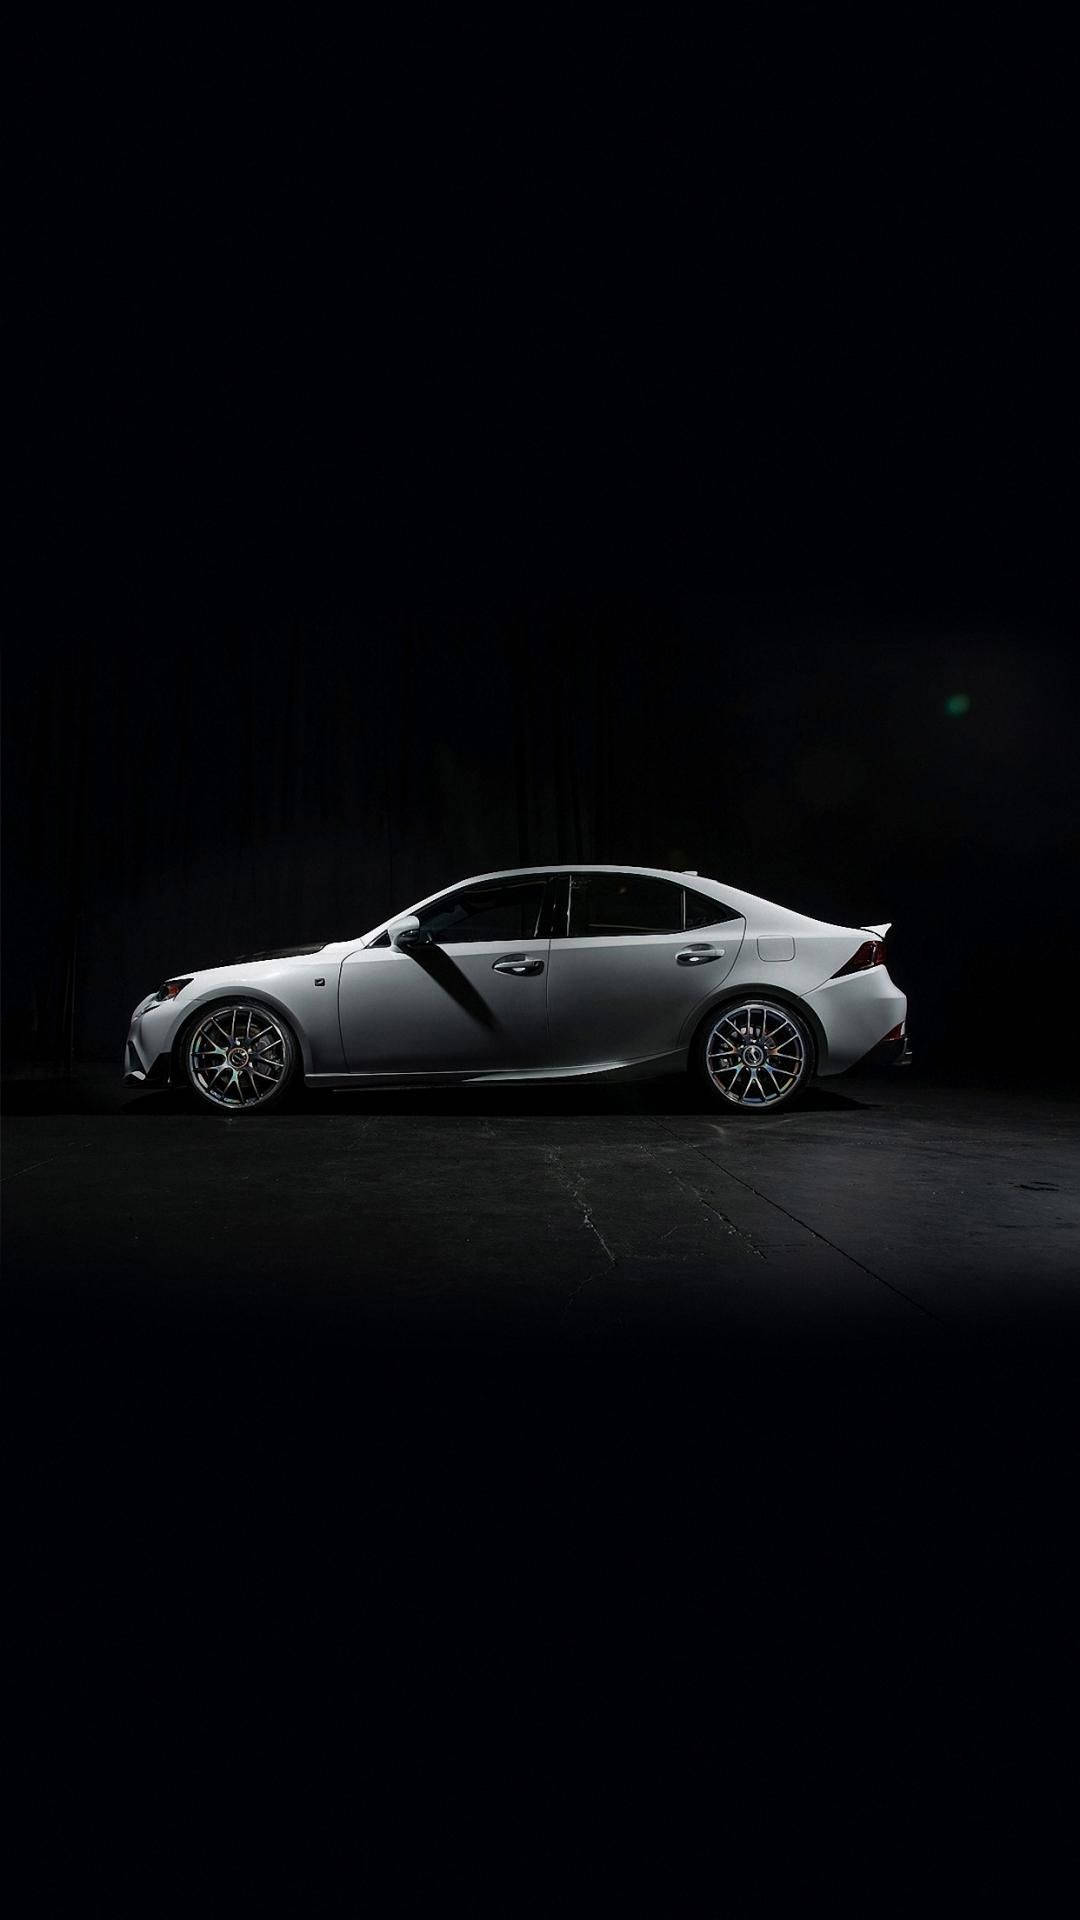 White Lexus Coupe Side Iphone Background